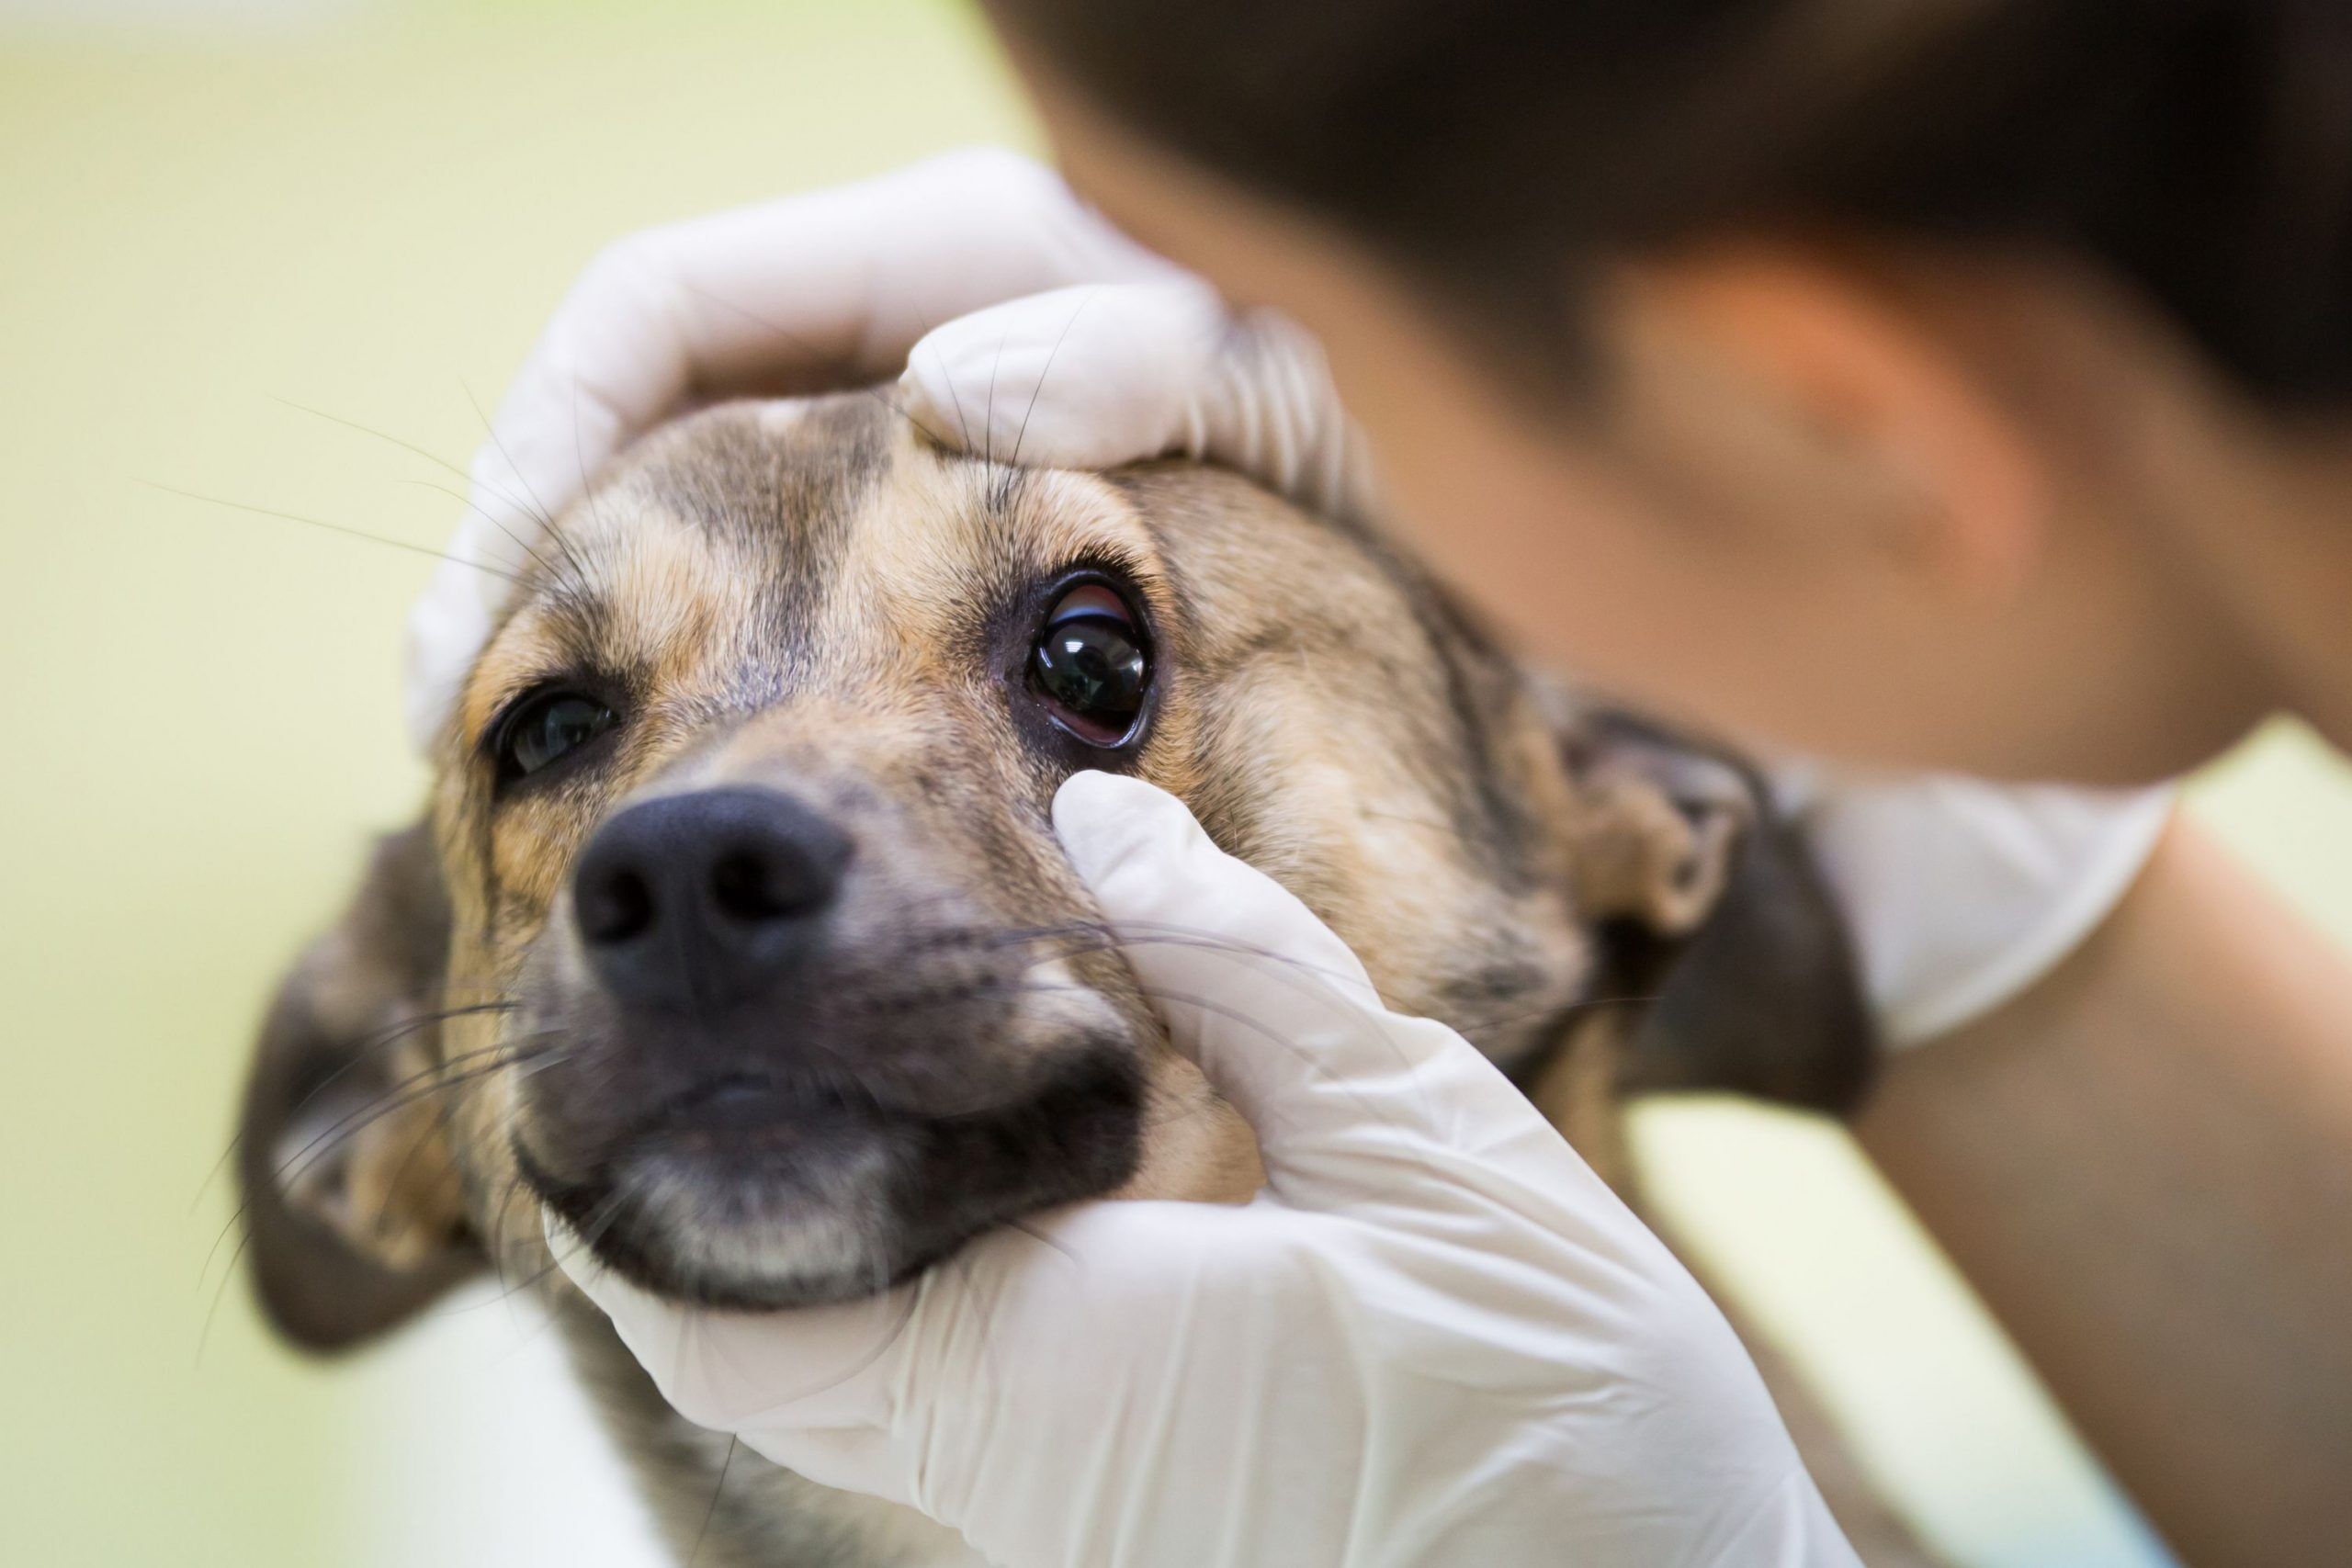 dog with eye discharge and vet looking at the dog's eye